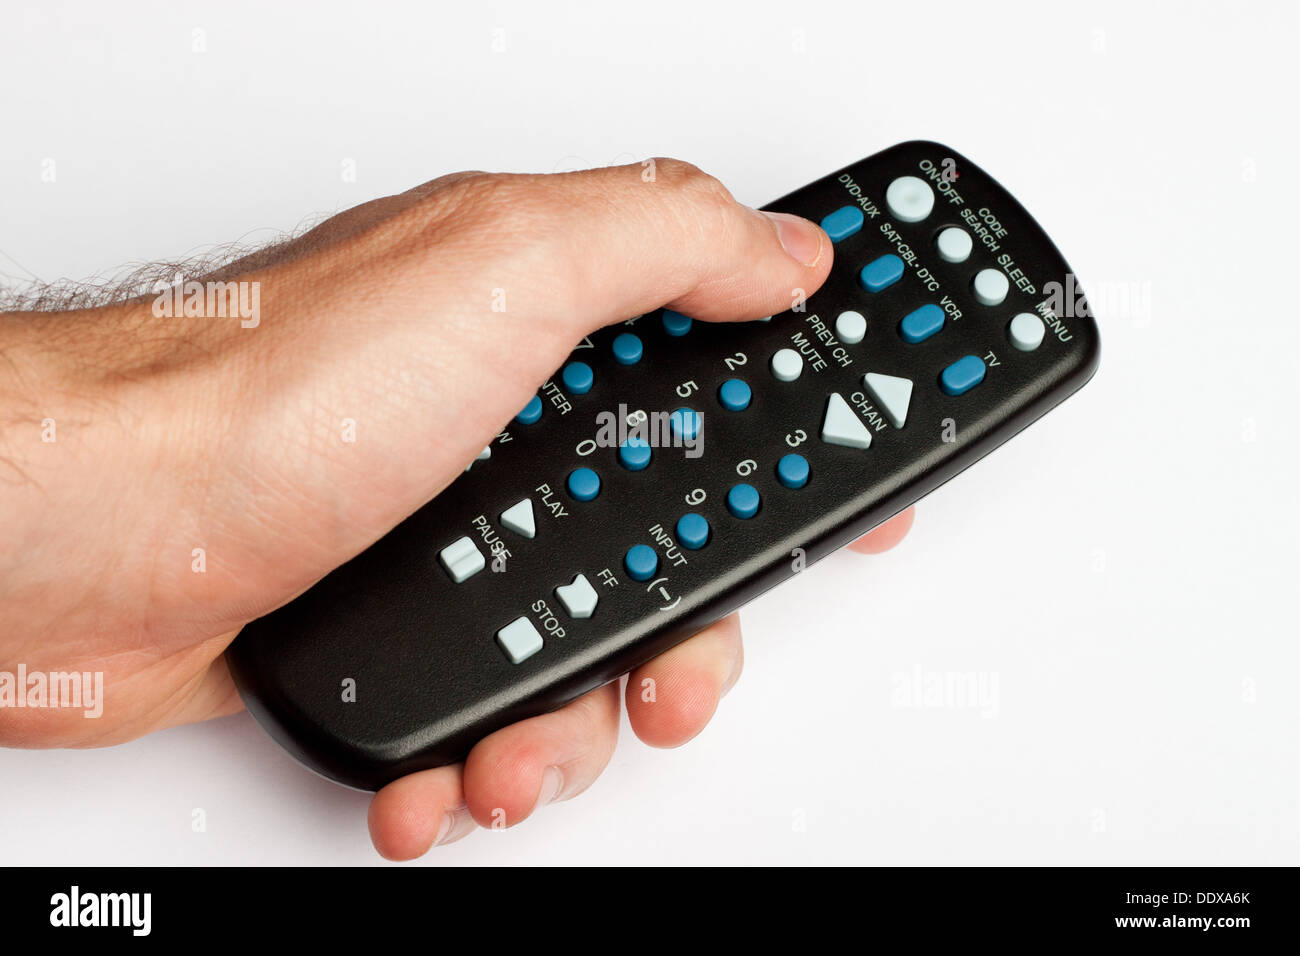 Hand holding a black TV remote Stock Photo